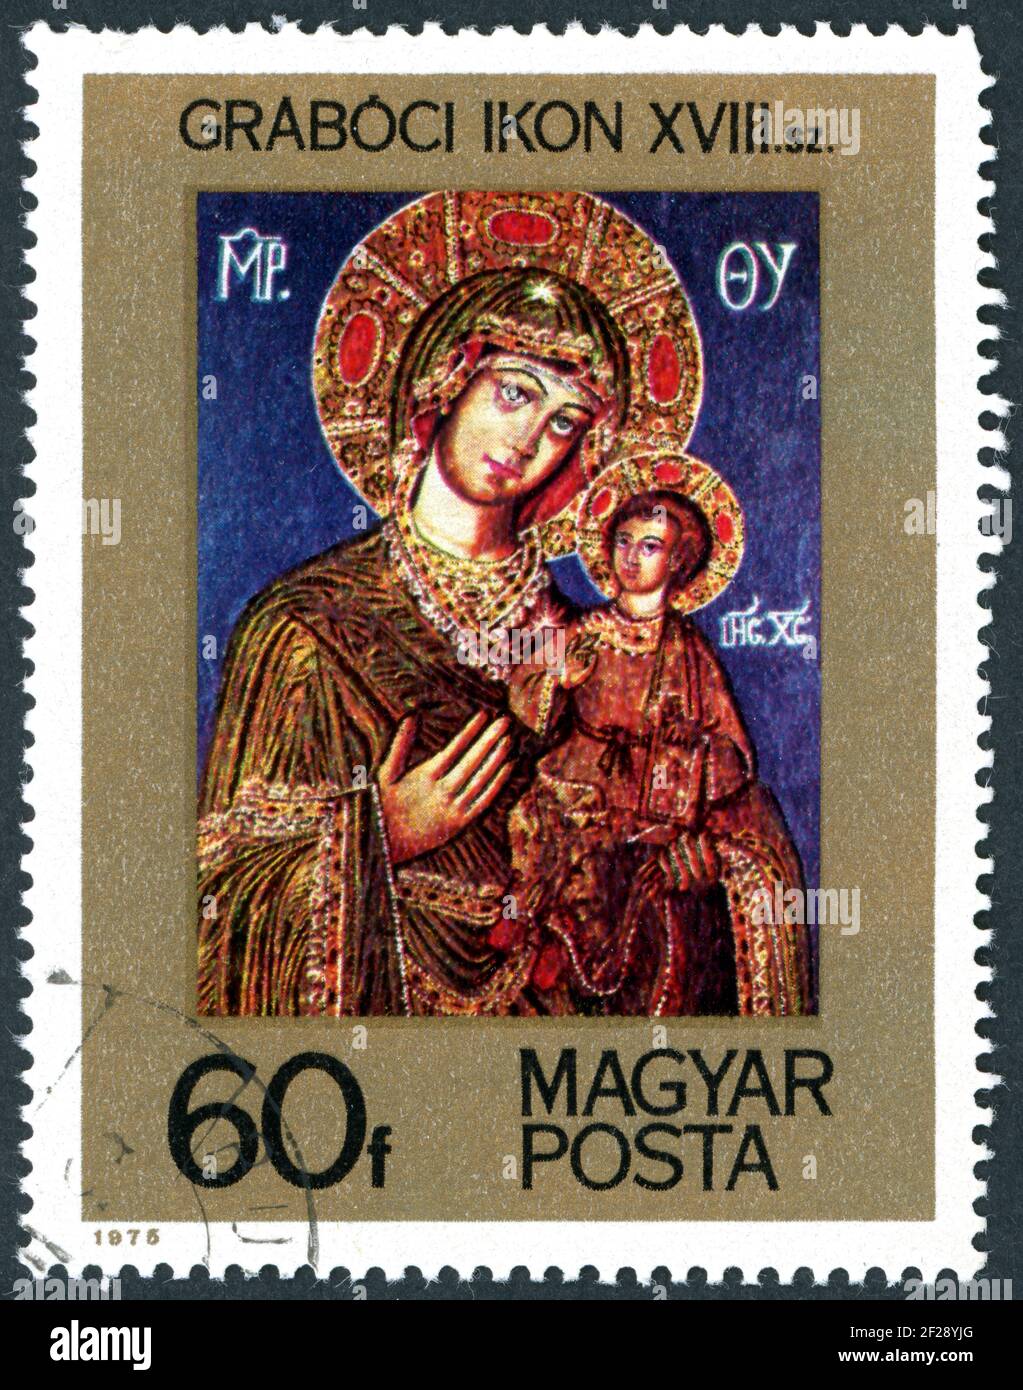 HUNGARY - CIRCA 1975: A stamp printed in Hungary, shows the 18th century Hungarian icons from Graboc: Virgin and Child, circa 1975 Stock Photo